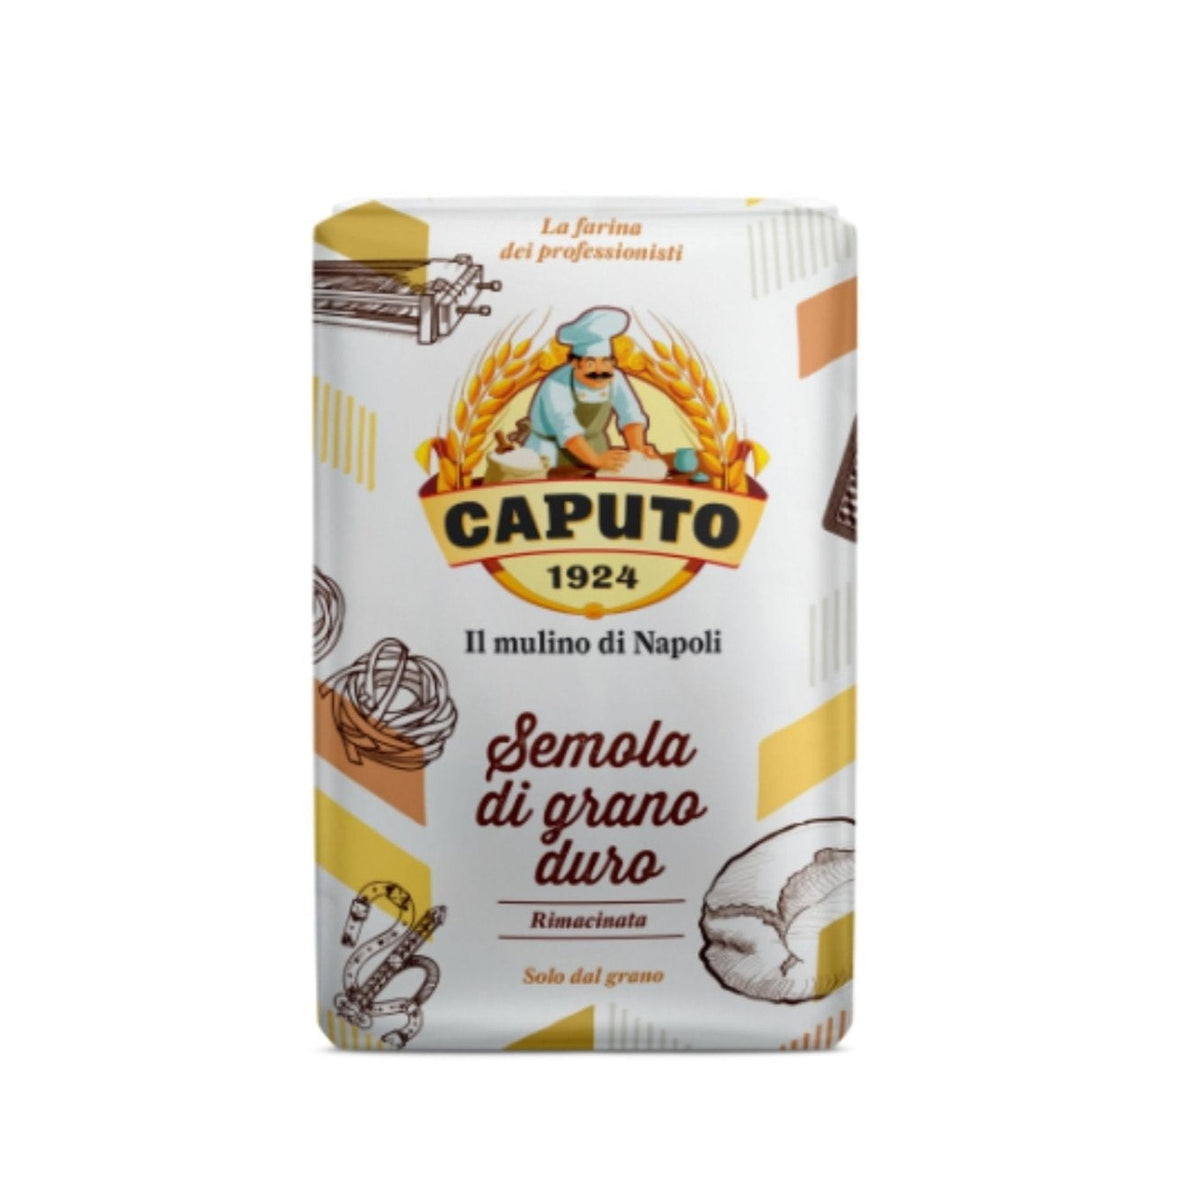 Molino Caputo Semolina Rimancinata 1kg  | Imported and distributed in the UK by Just Gourmet Foods